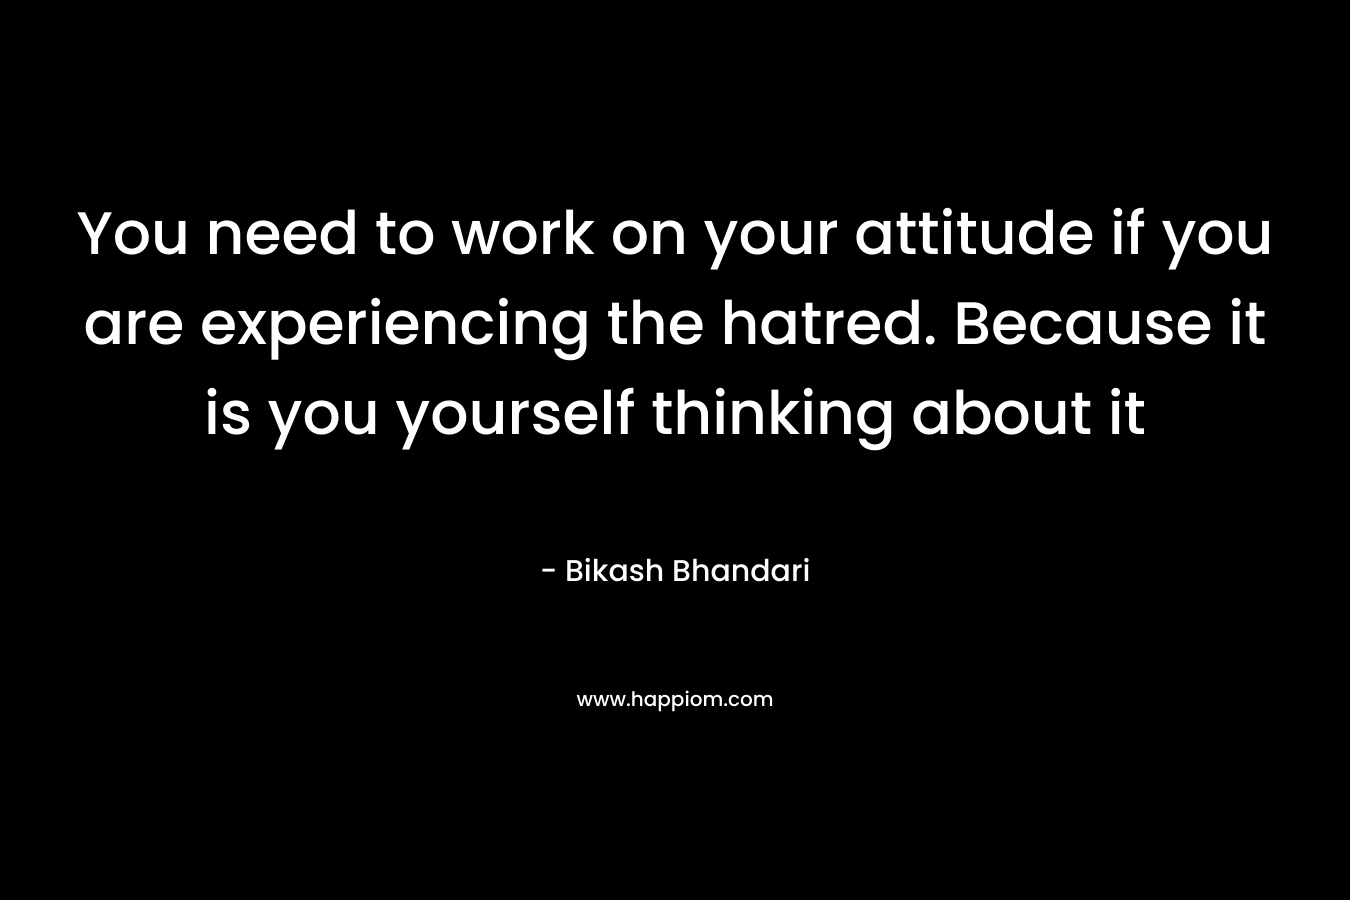 You need to work on your attitude if you are experiencing the hatred. Because it is you yourself thinking about it